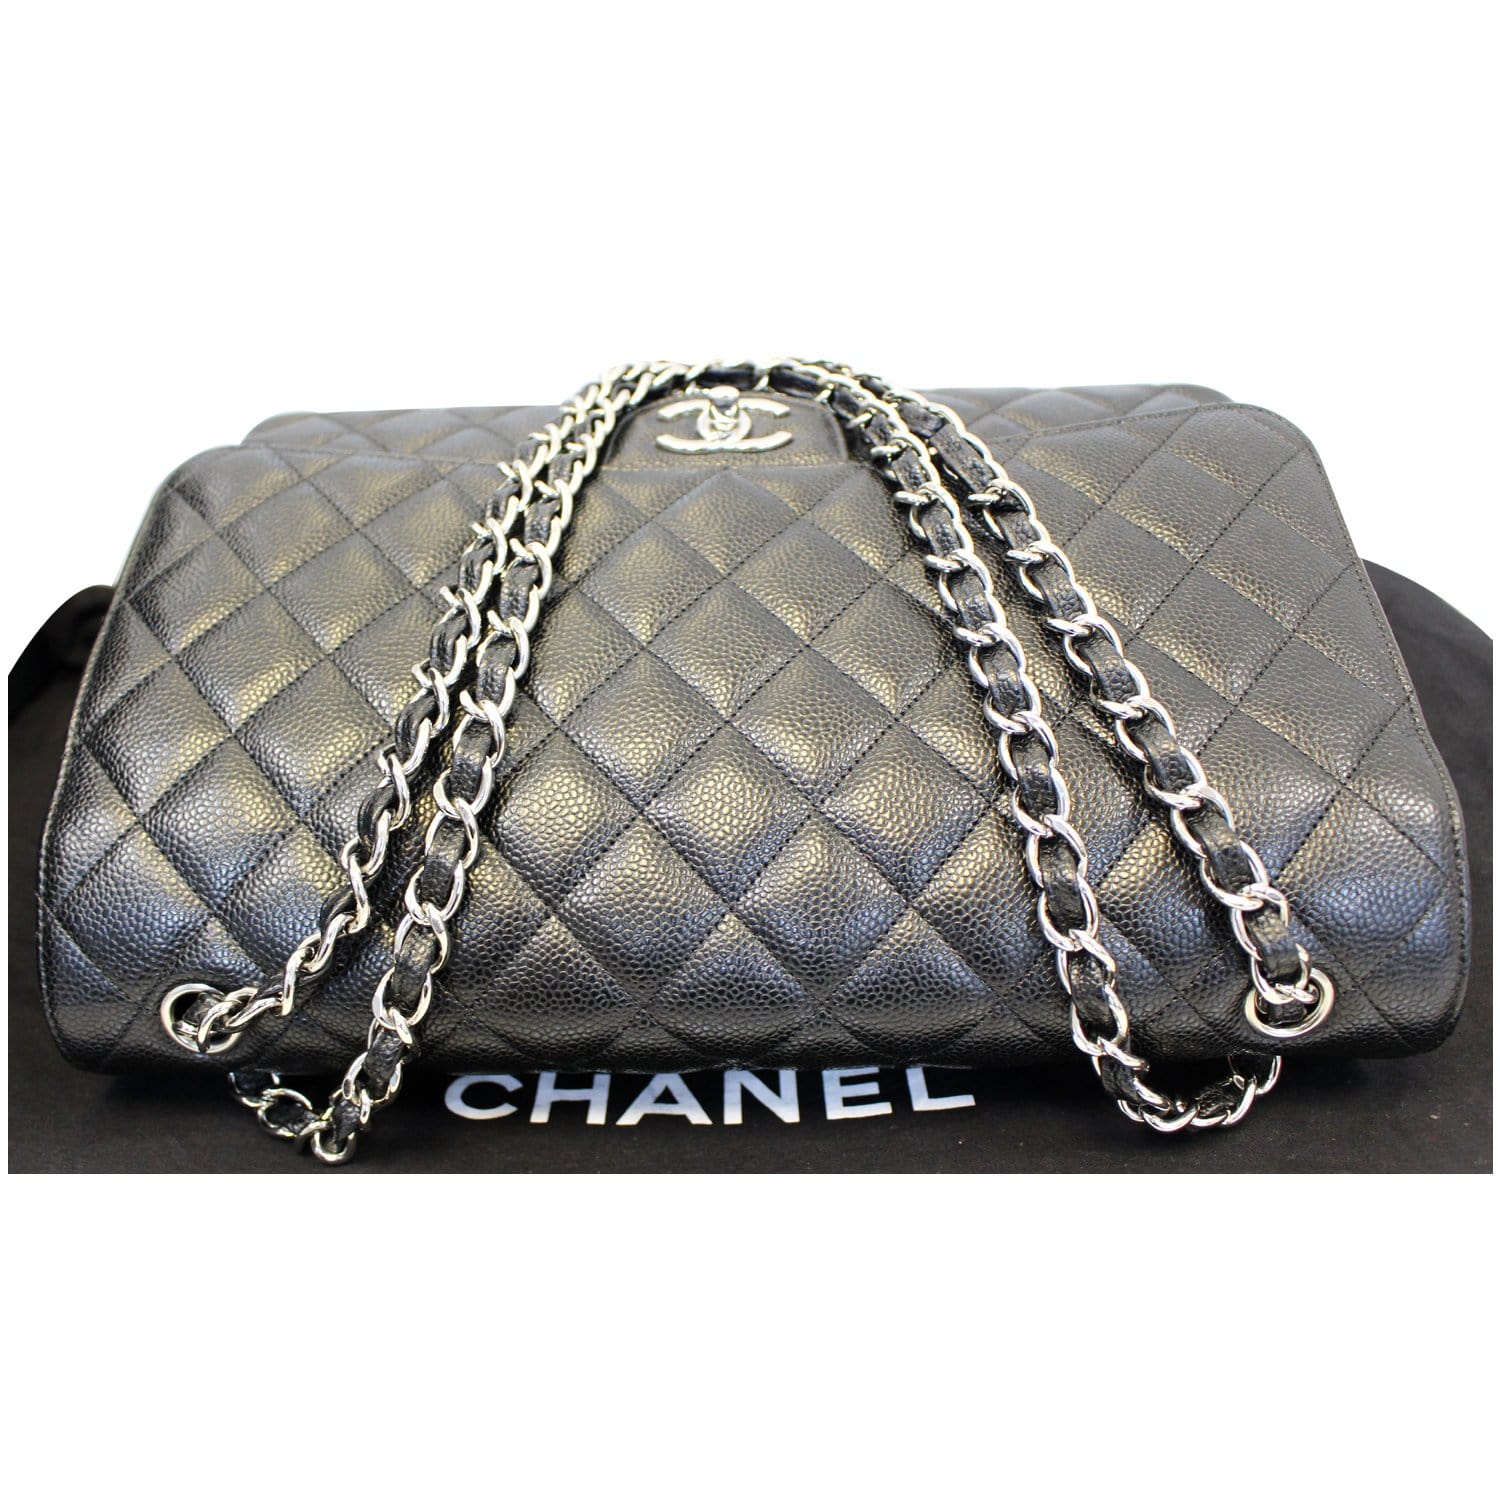 This gorgeous Chanel Maxi Double Flap in Black Caviar Leather with Gold  Hardware is available today @brplux for only $7,999 OBO! Free…